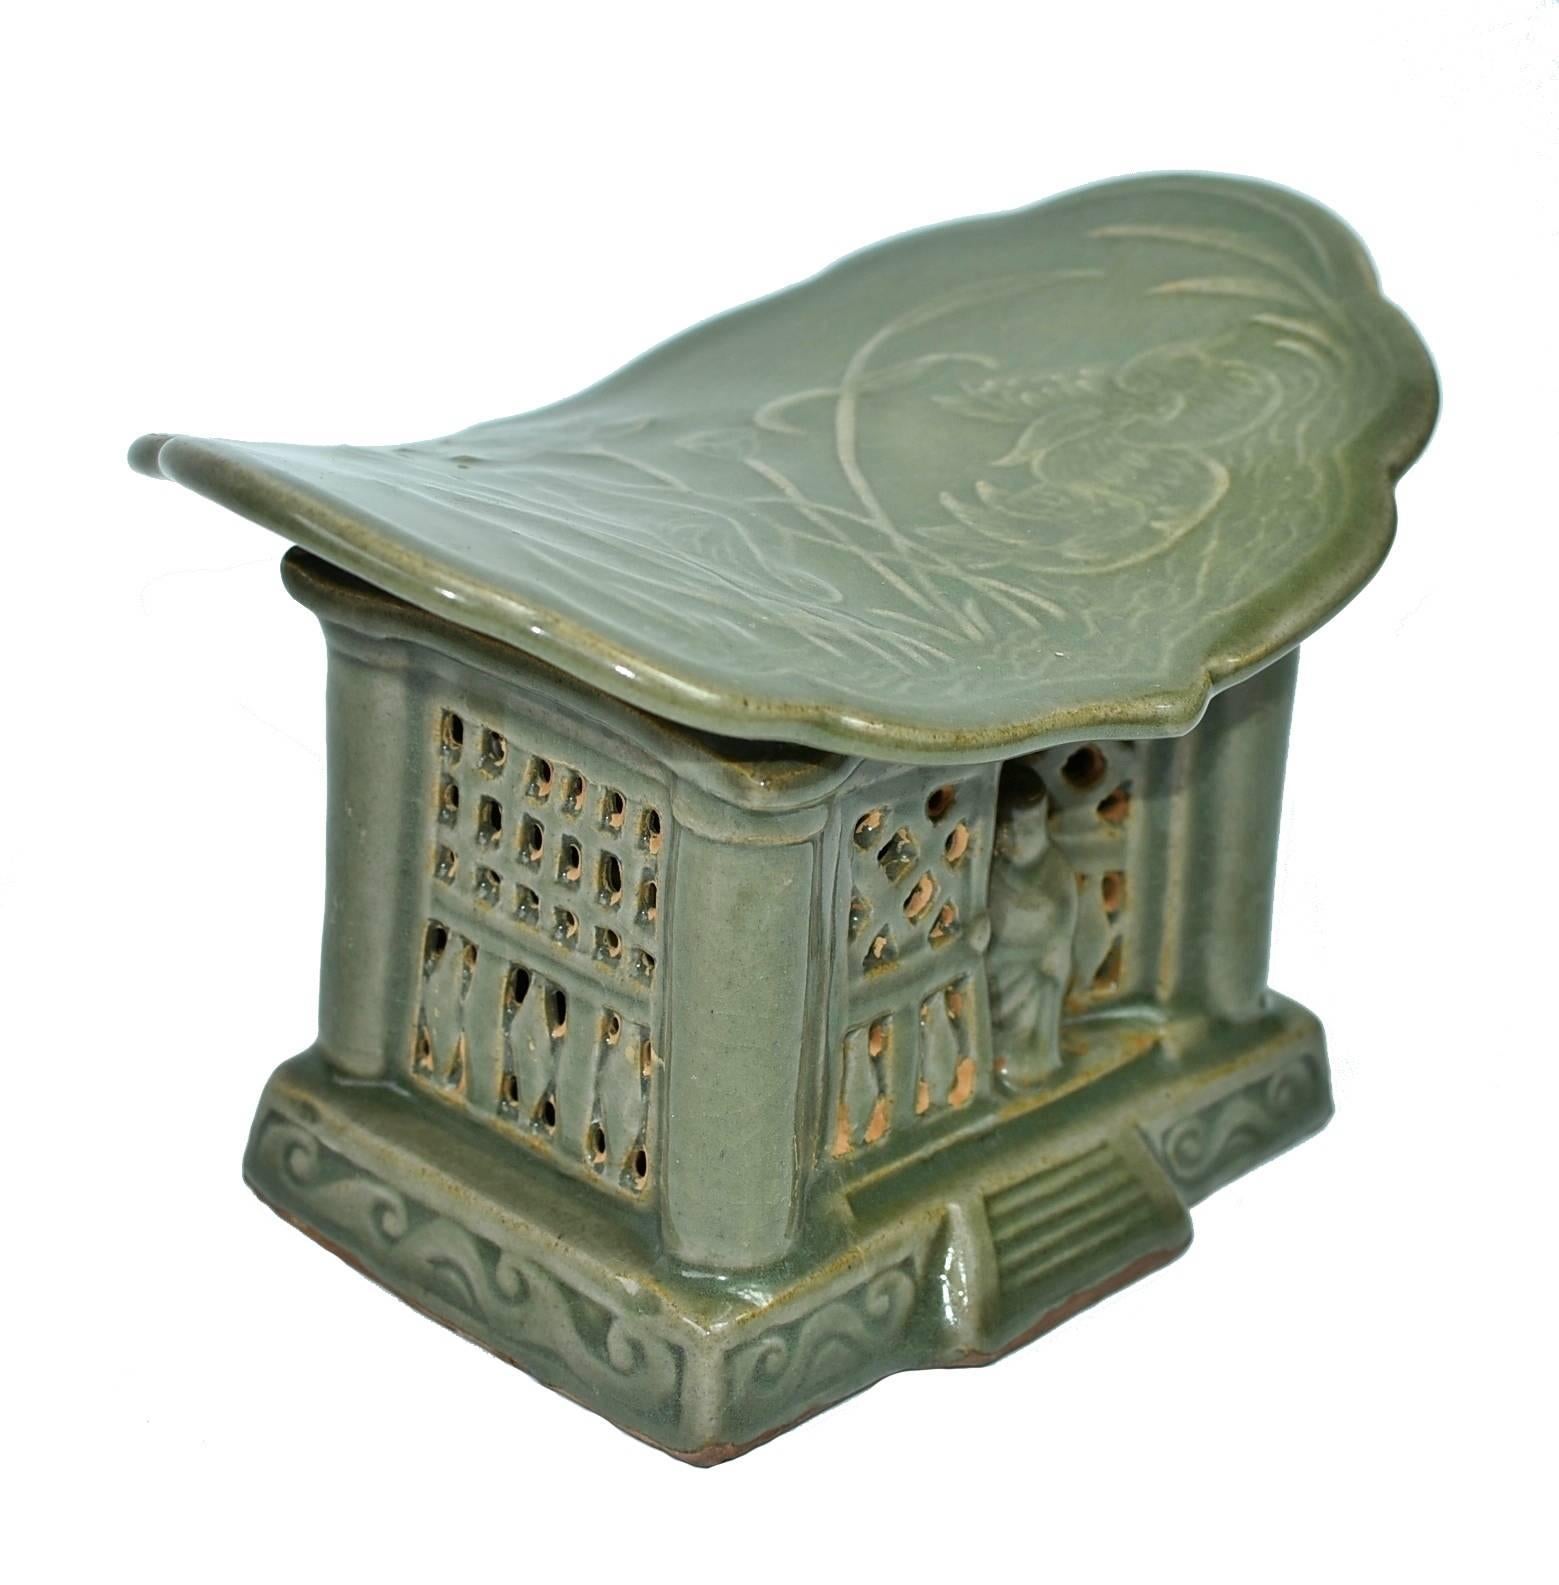 A song dynasty style porcelain pillow of the Long Quan kiln. The Long Quan kiln is one of the most important Song dynasty kilns. Started 1600 years ago, it produces celadon green and lotus leaf green glazed pieces with subtle under-glaze